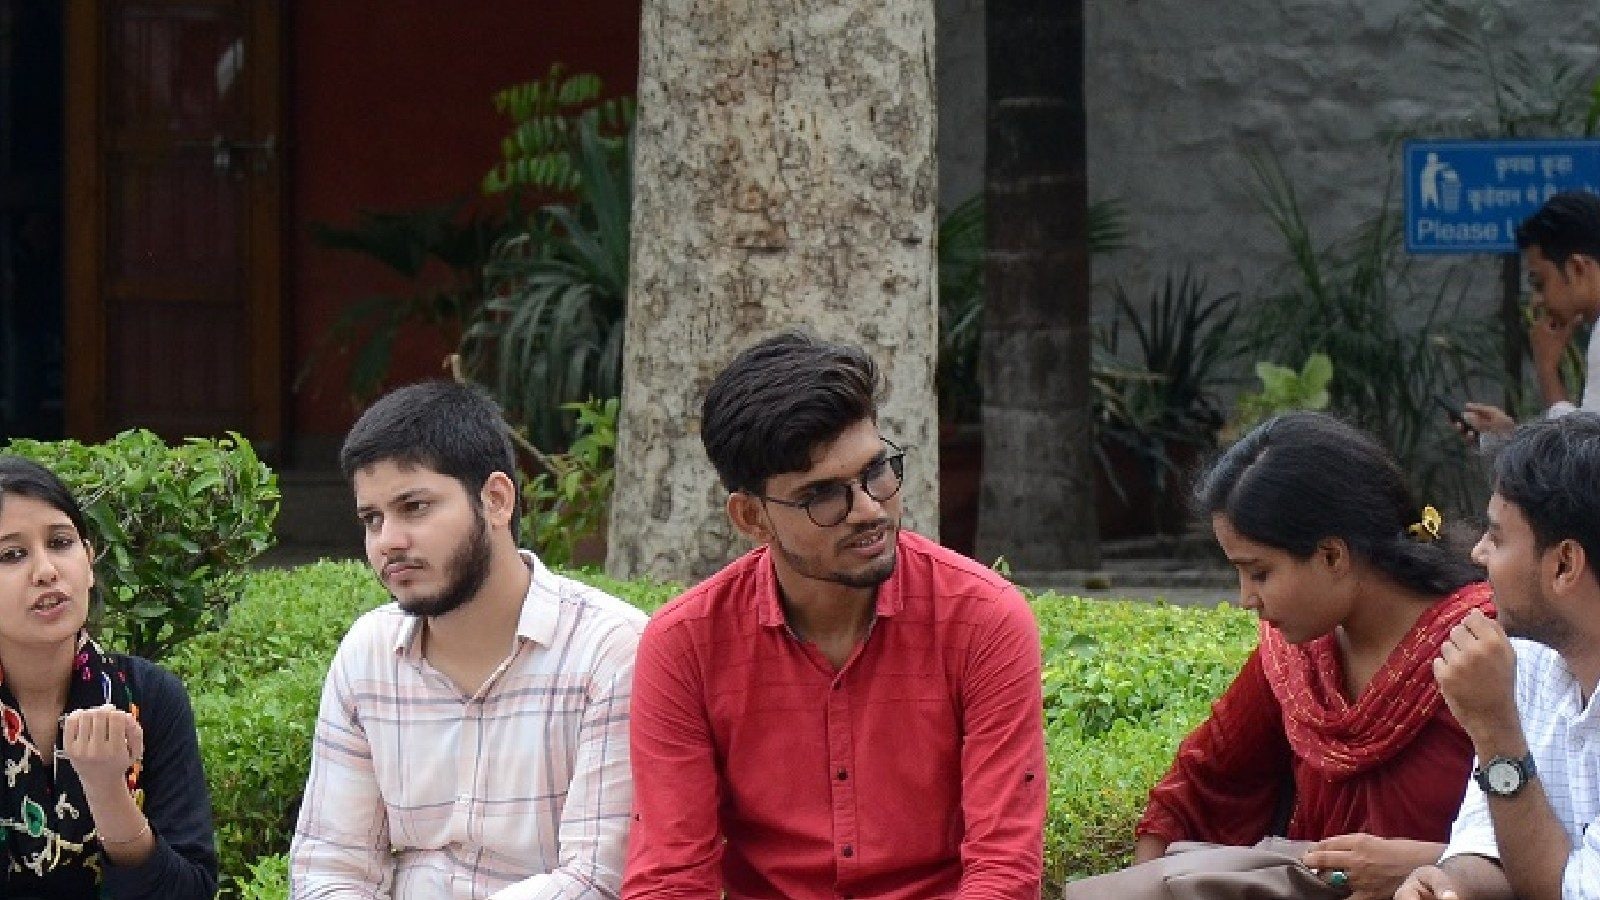 UPSC CDS 2022 Notification Released for 341 Posts, Exam on April 10: From Eligibility to How to Apply, Everything You Need to Know